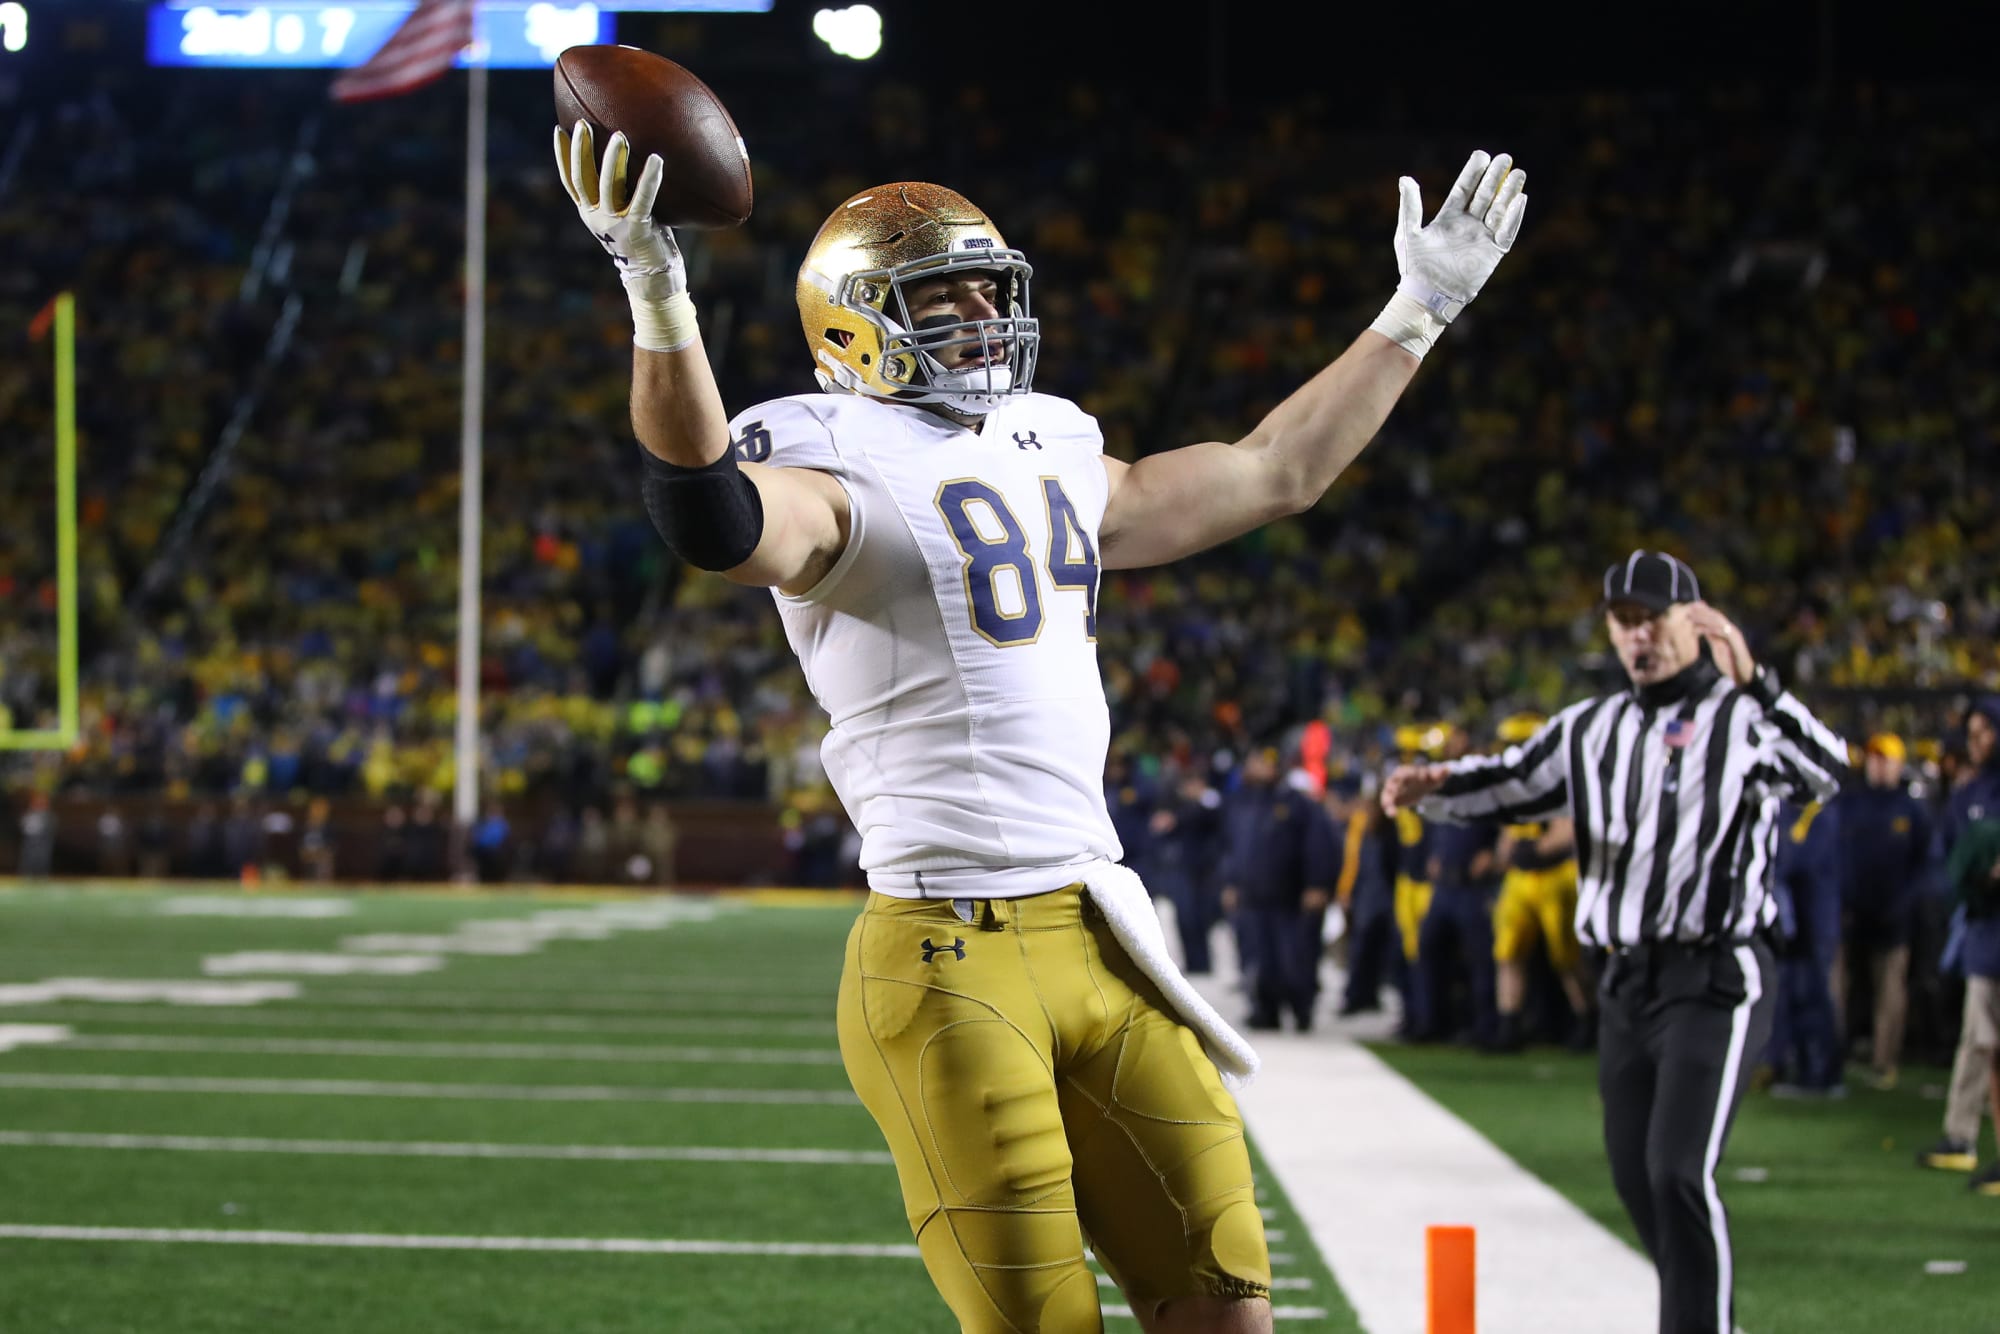 Chicago Bears get a highupside TE with Cole Kmet in 2nd round